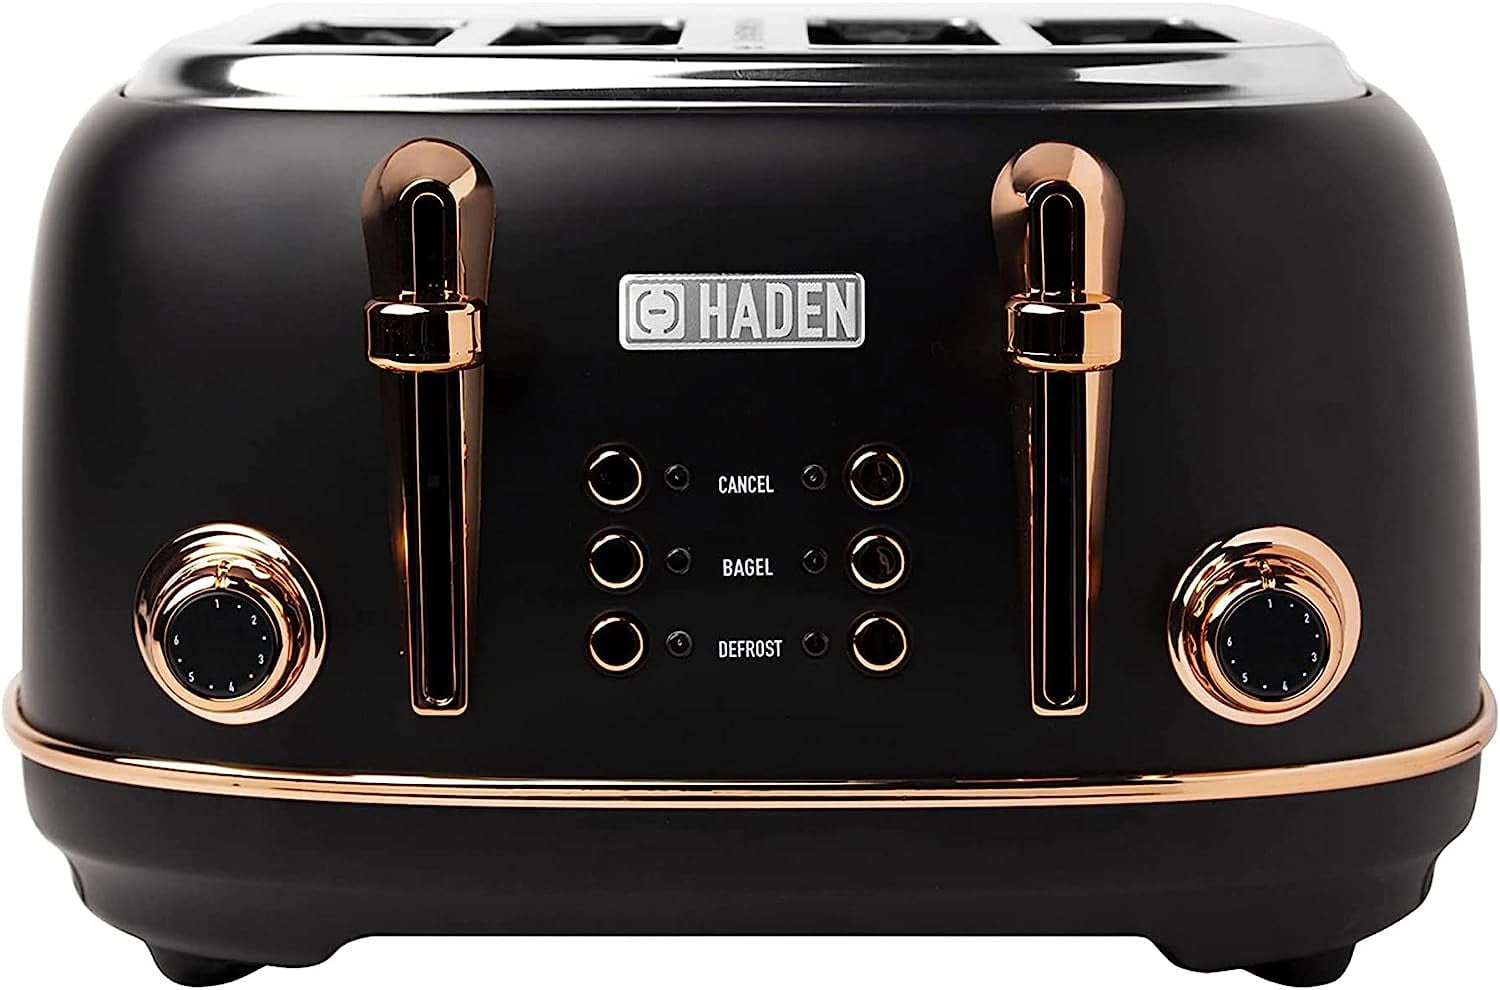 Haden Heritage Stainless Steel Electric Tea Kettle with Toaster, Black/ Copper, 1 Piece - QFC